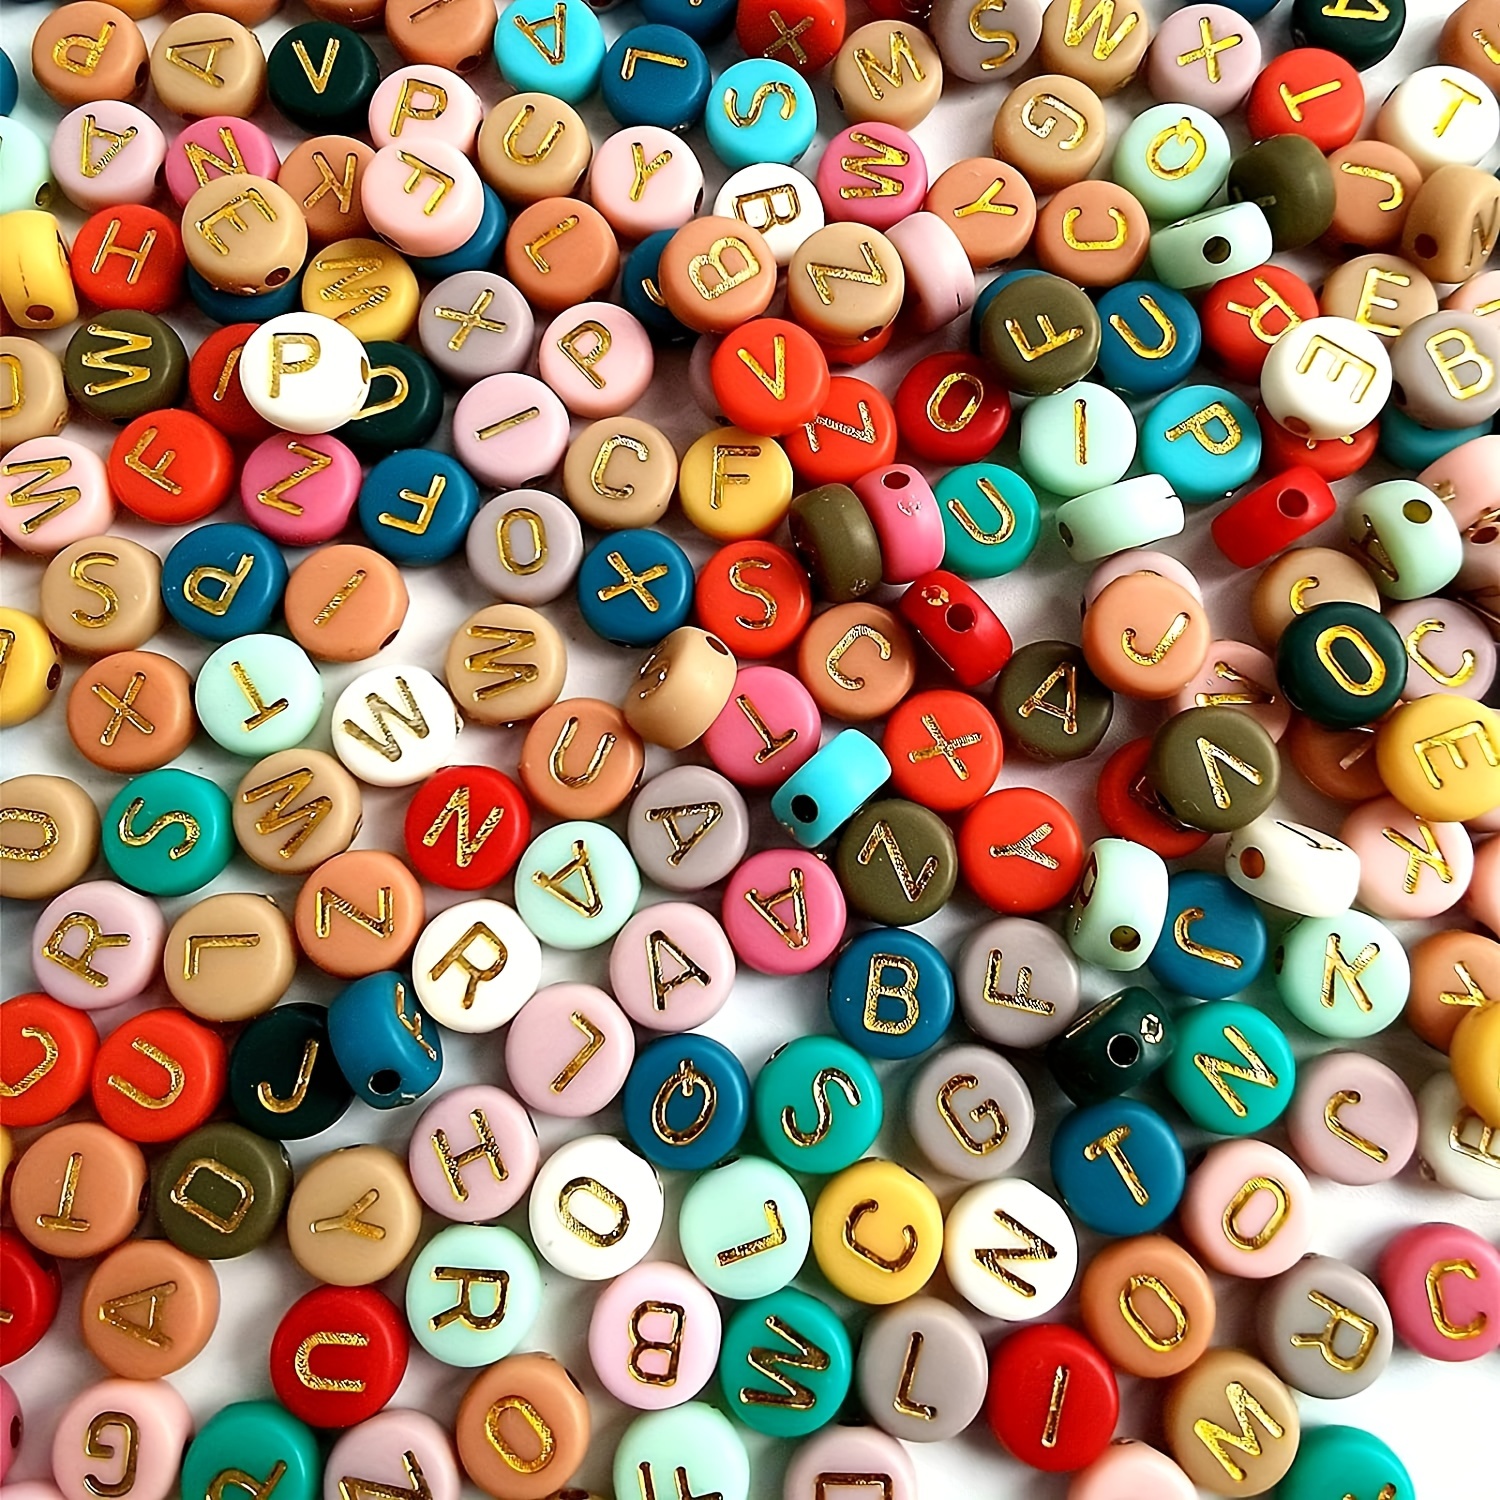 

1000pcs 4x7mm Round Letter Beads Colorful Acrylic Beads With Golden Letter Alphabet Beads For Diy Jewelry Making Bracelet Necklace Accessories